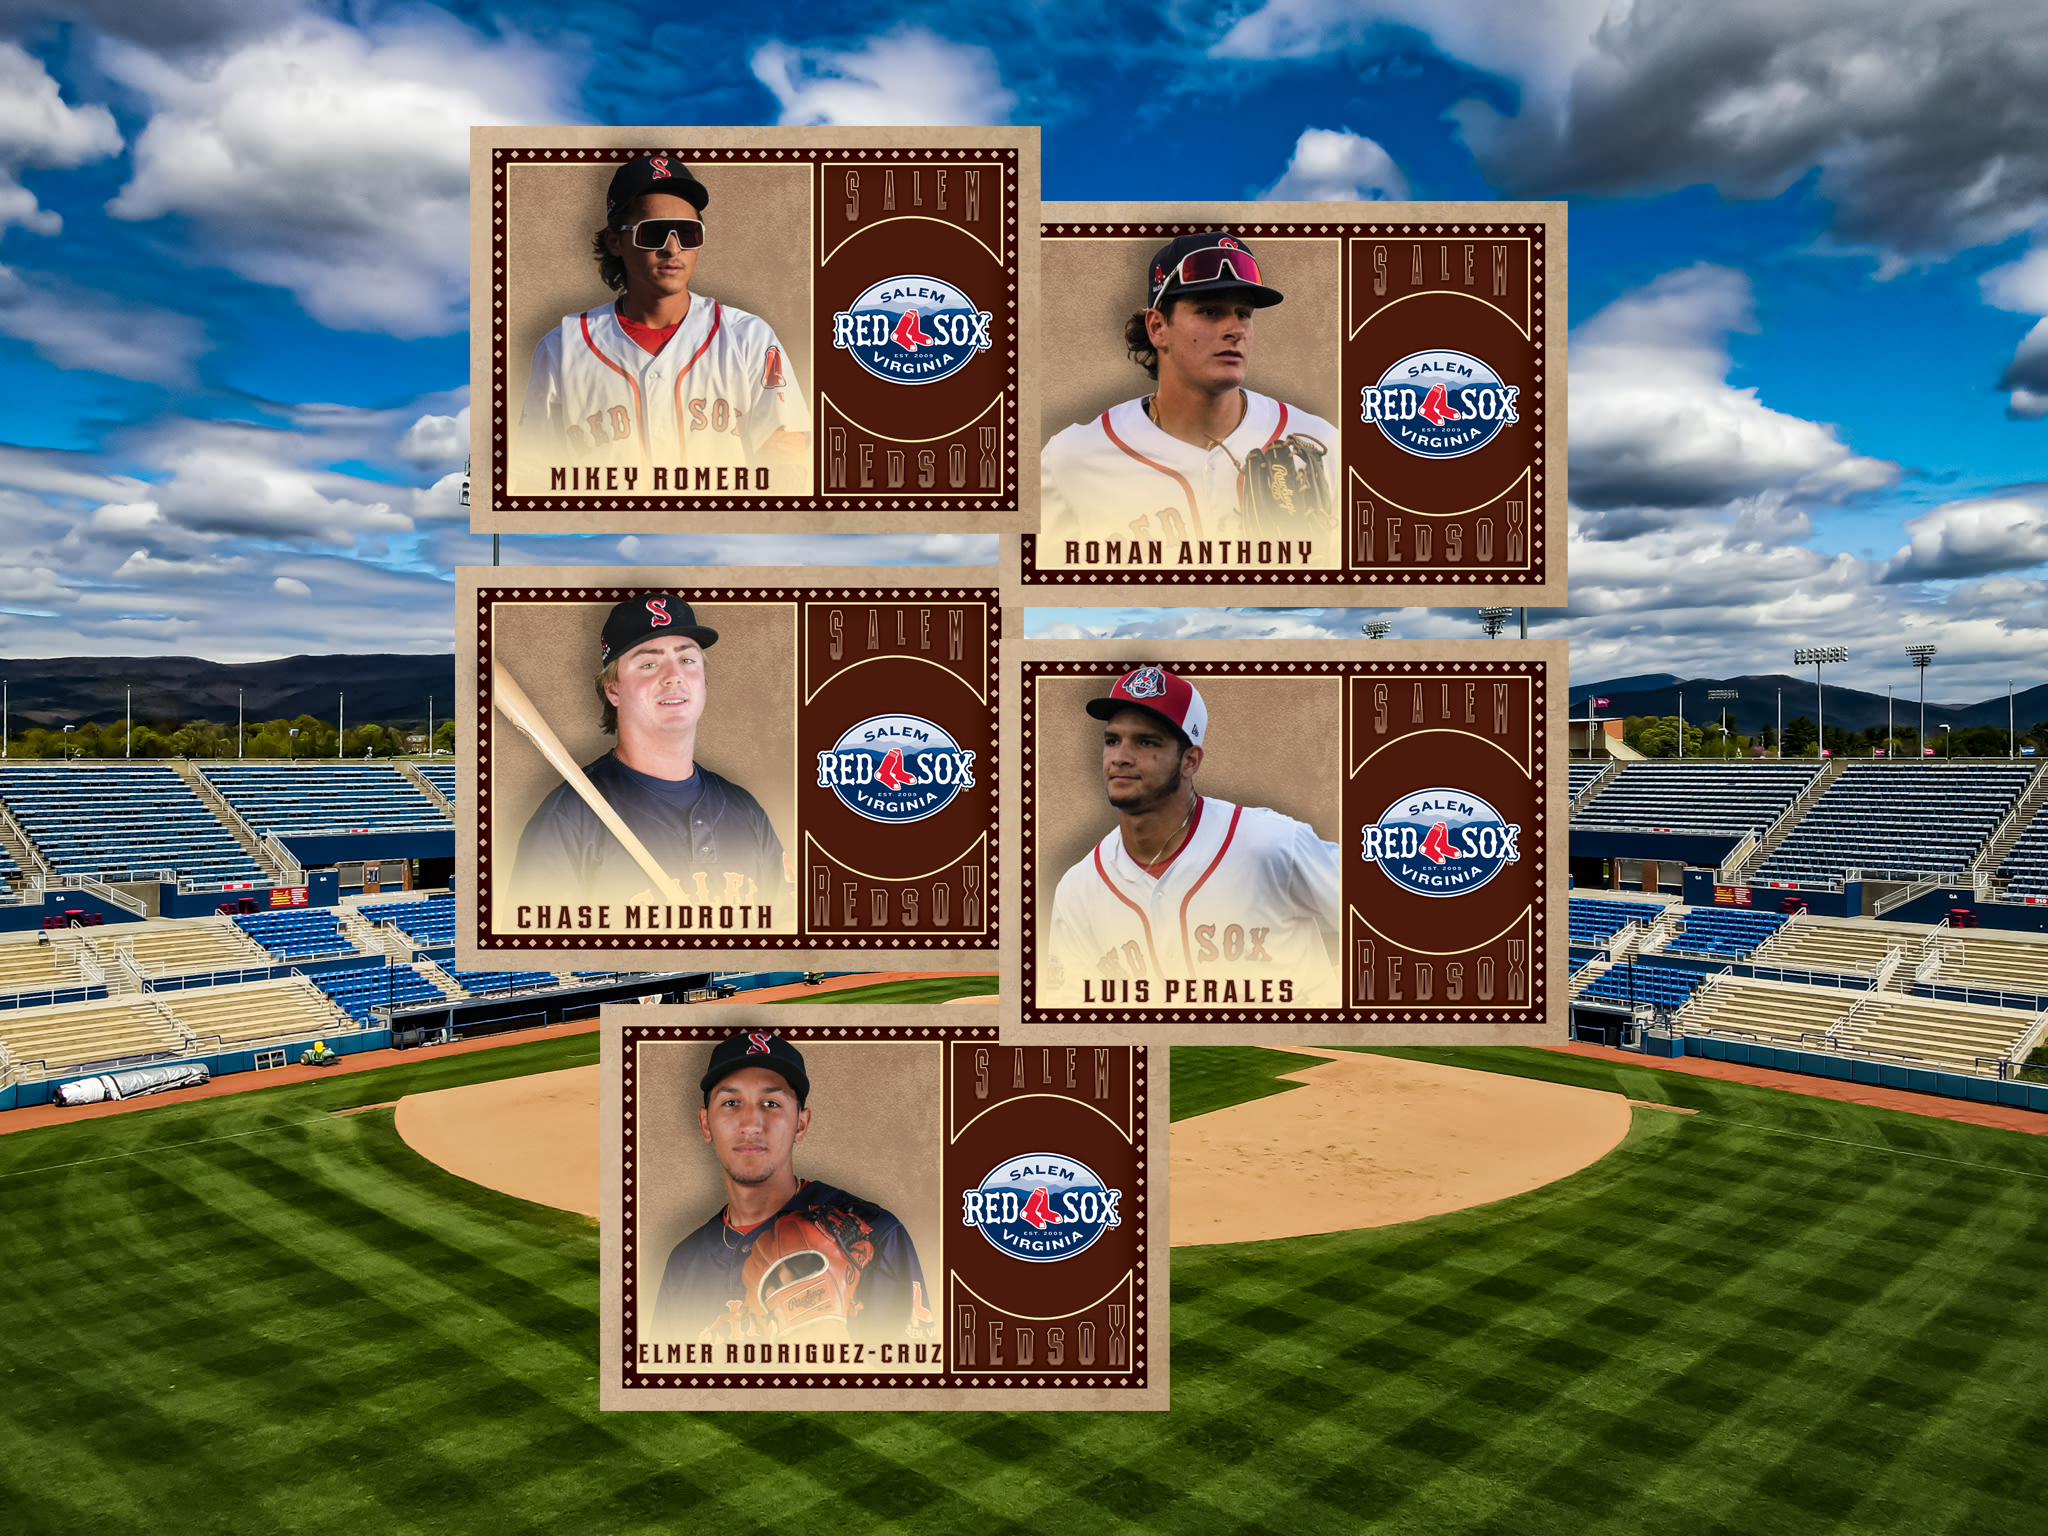 Salem Red Sox - Your 2021 Salem Red Sox Team Player Cards are in! Get a set  before they are gone!